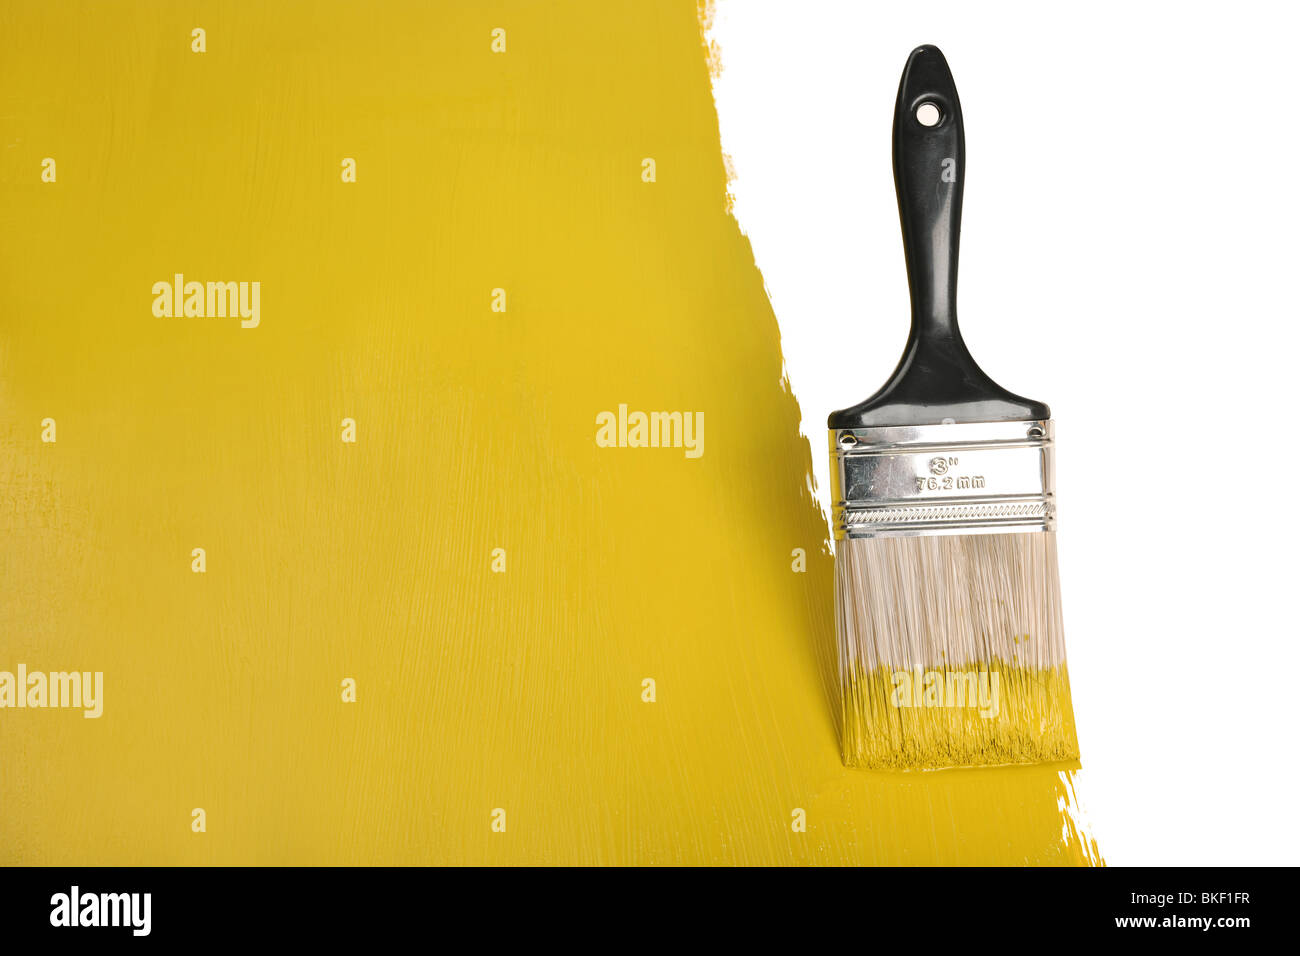 Brush painting wall with yellow paint Stock Photo